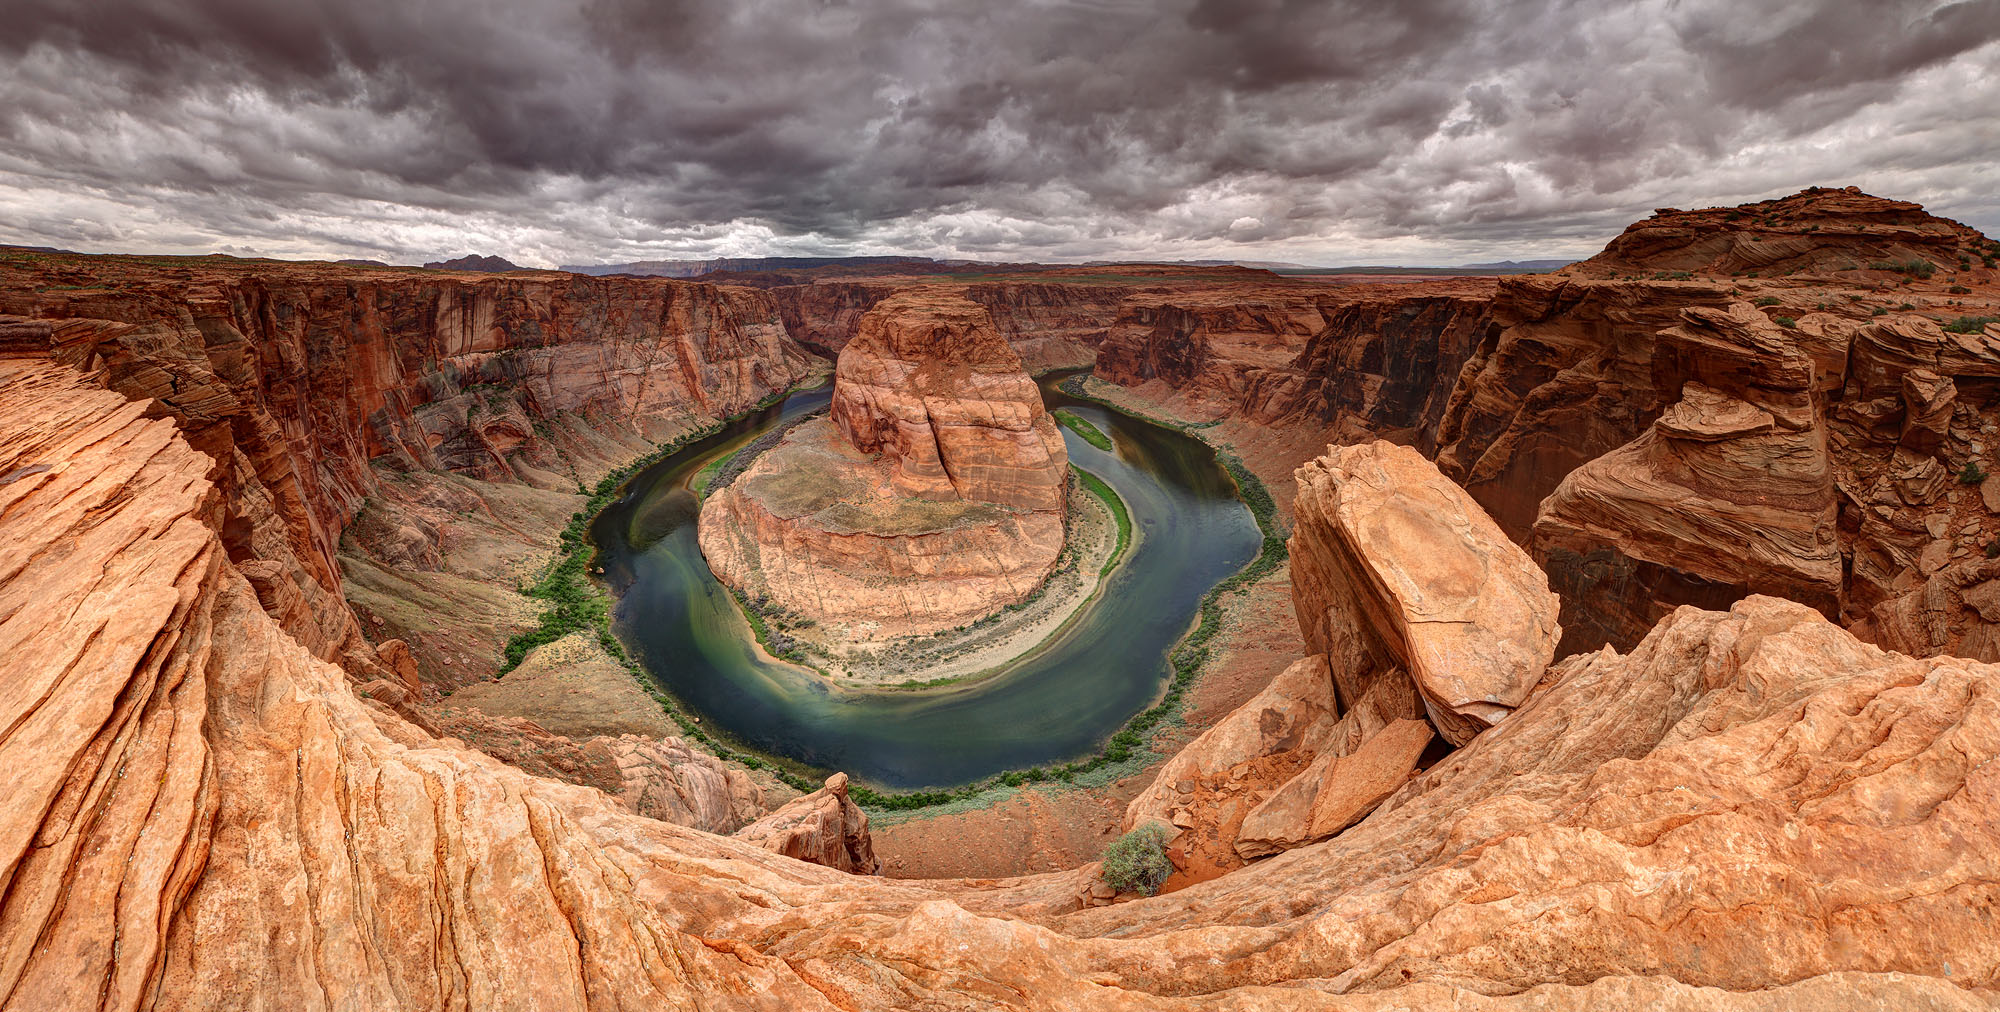 The thunderstorm skies over Horseshoe Bend show an incised meander of the Colorado River downstream of Glen Canyon and Lake Powell near Page in Arizona and marks the entrance to the Grand Canyon.